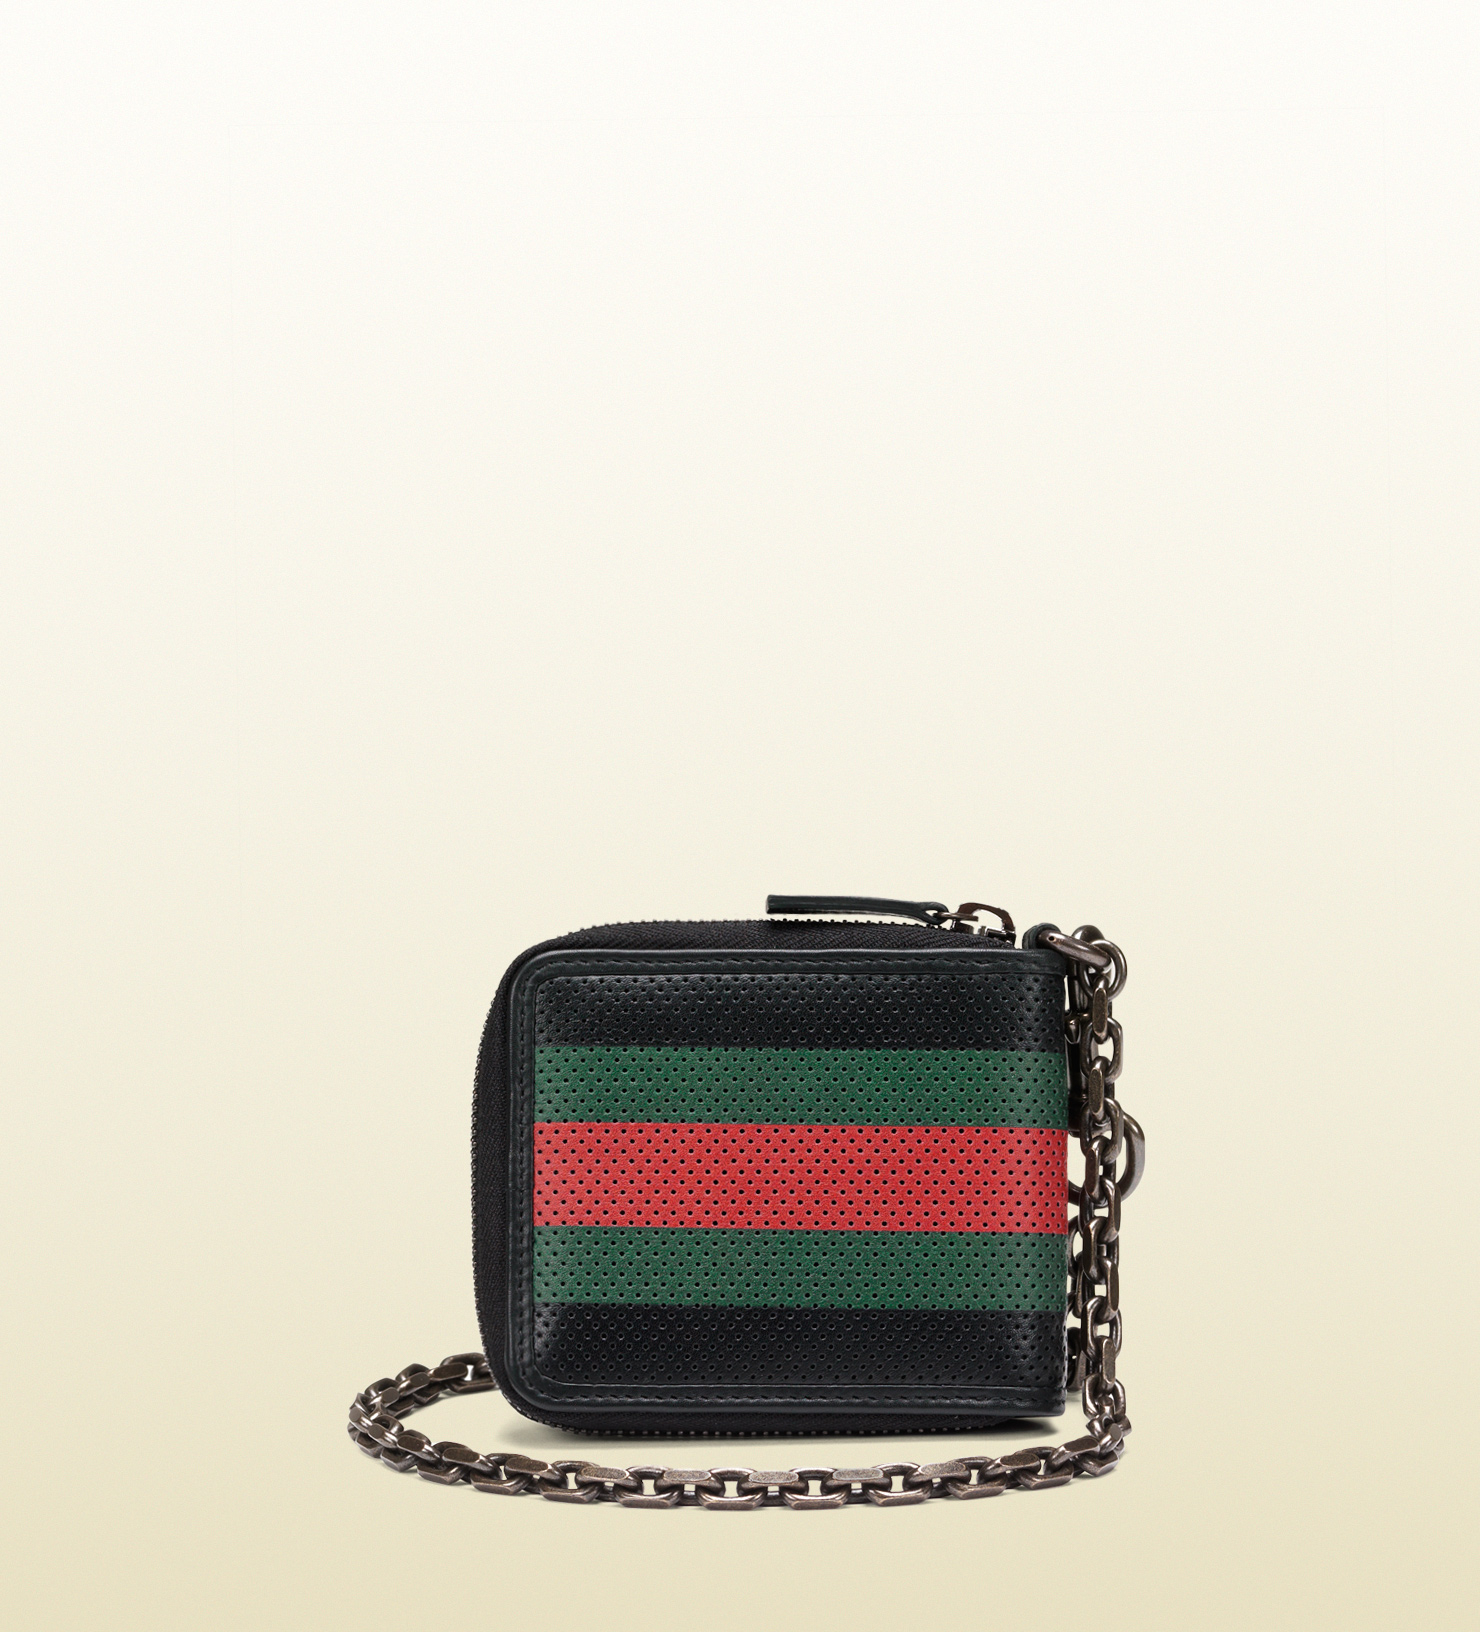 Gucci Perforated Leather Web Chain Wallet in Black for Men - Lyst